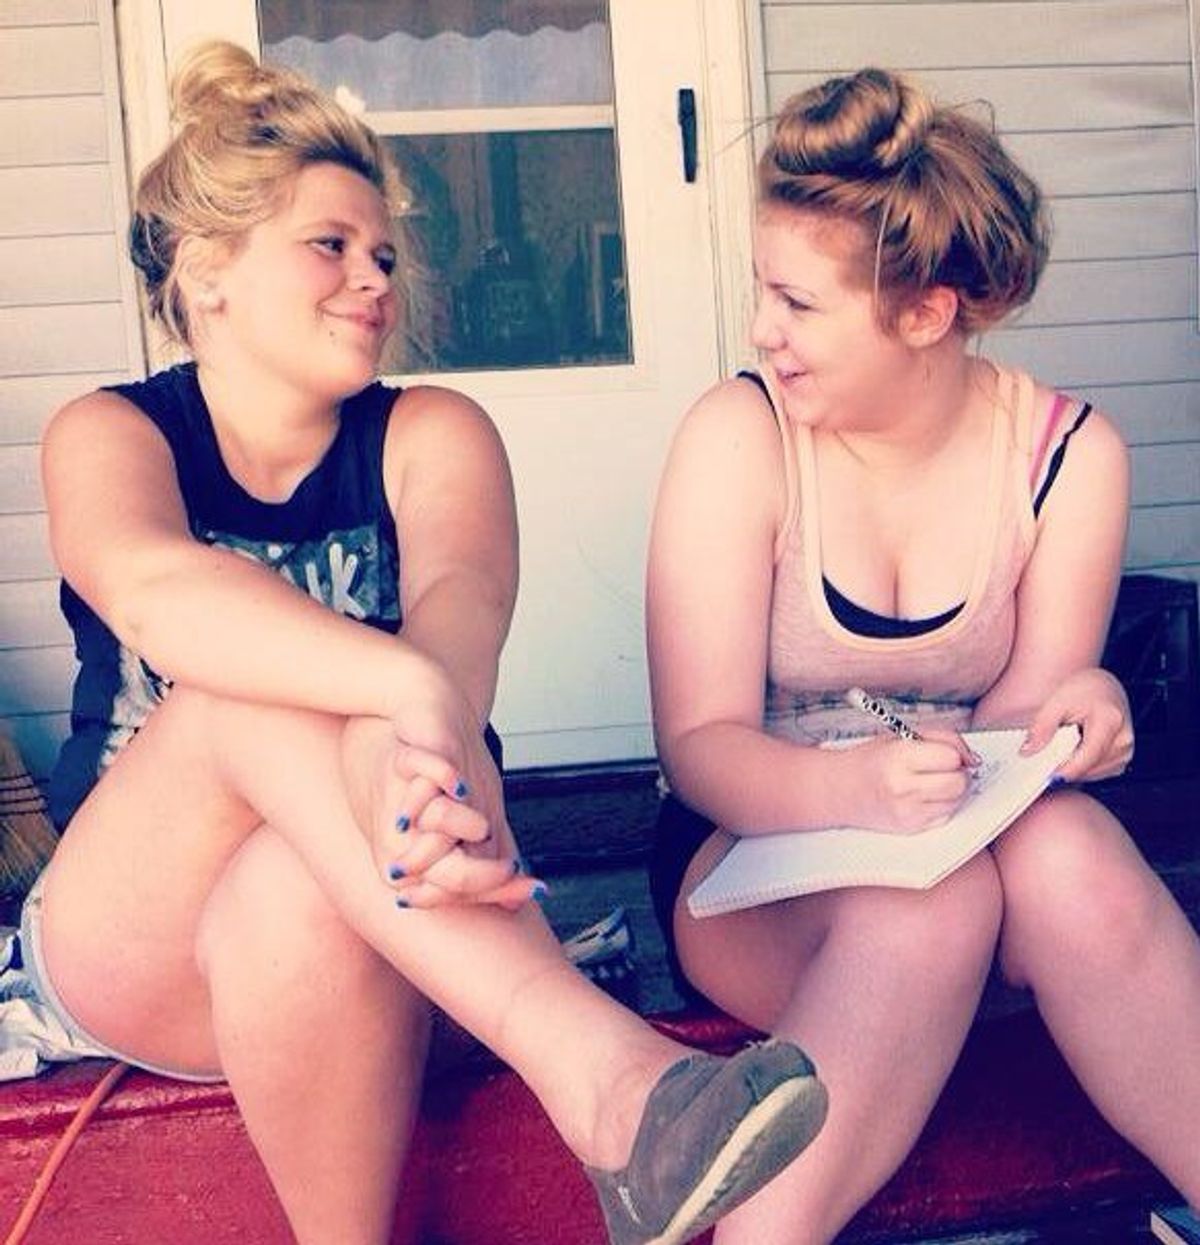 An Open Letter To My Cousin Who Is Also My Best Friend